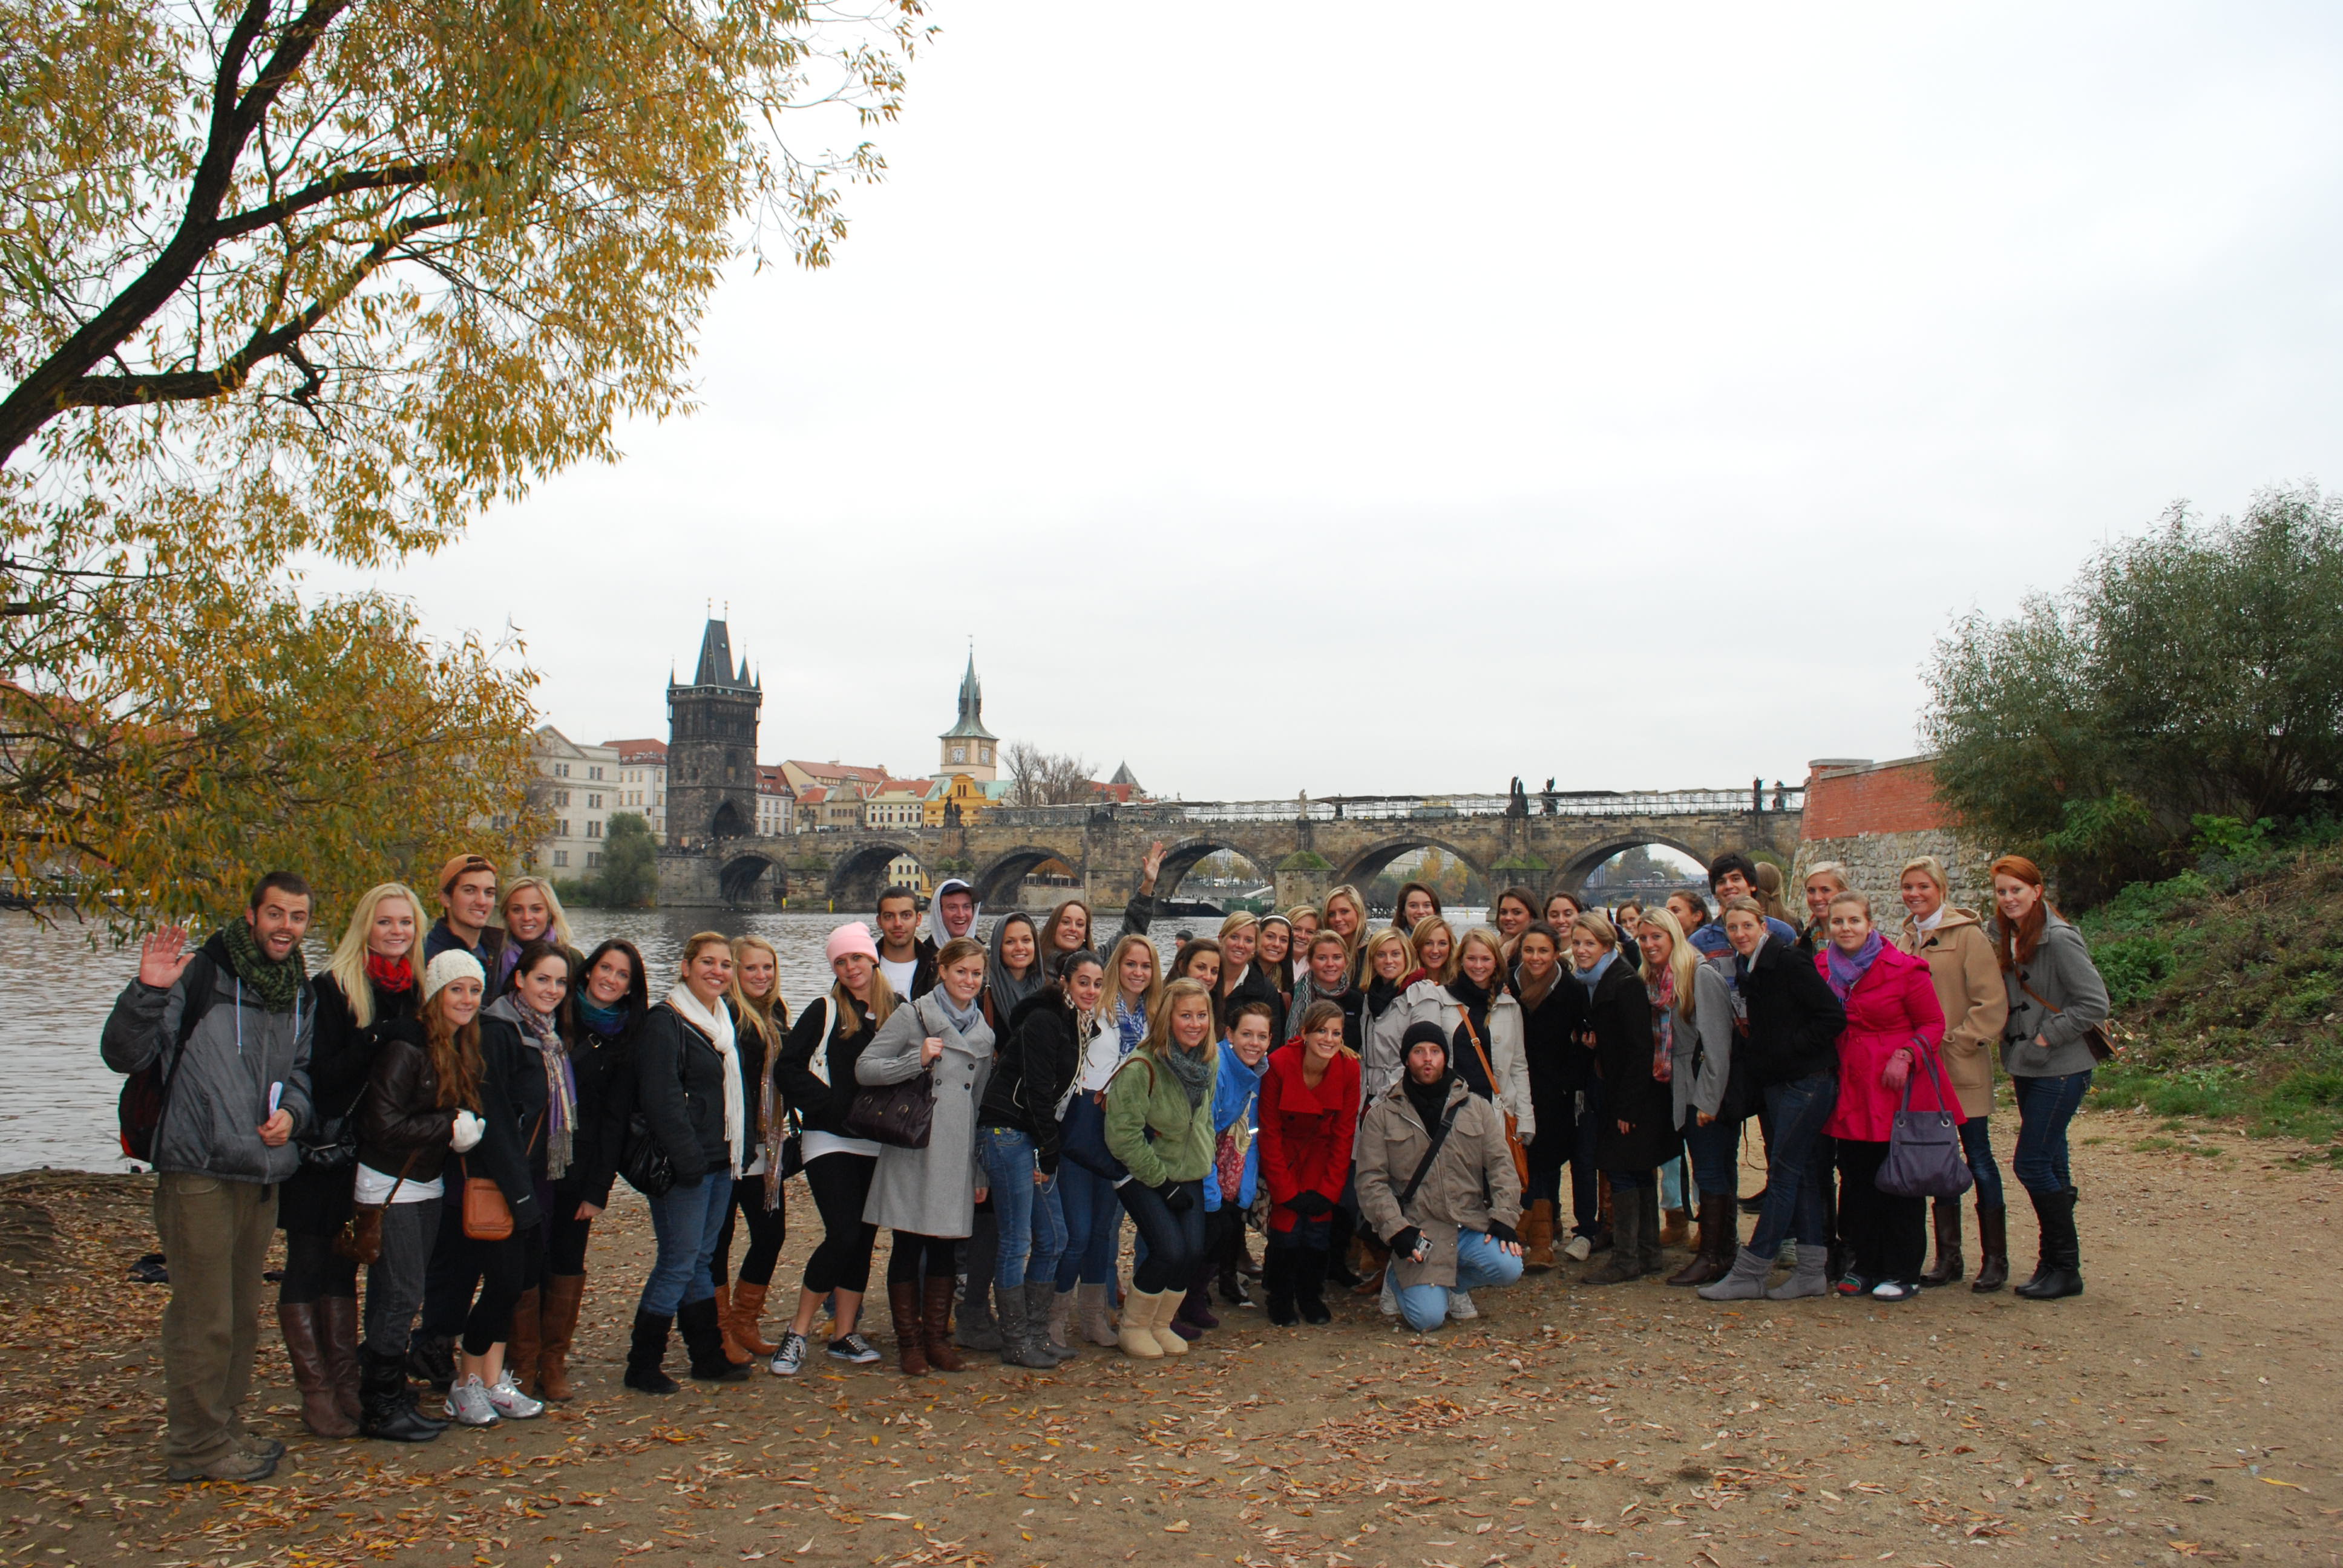 The B2A Crew with the Charles Bridge in the background